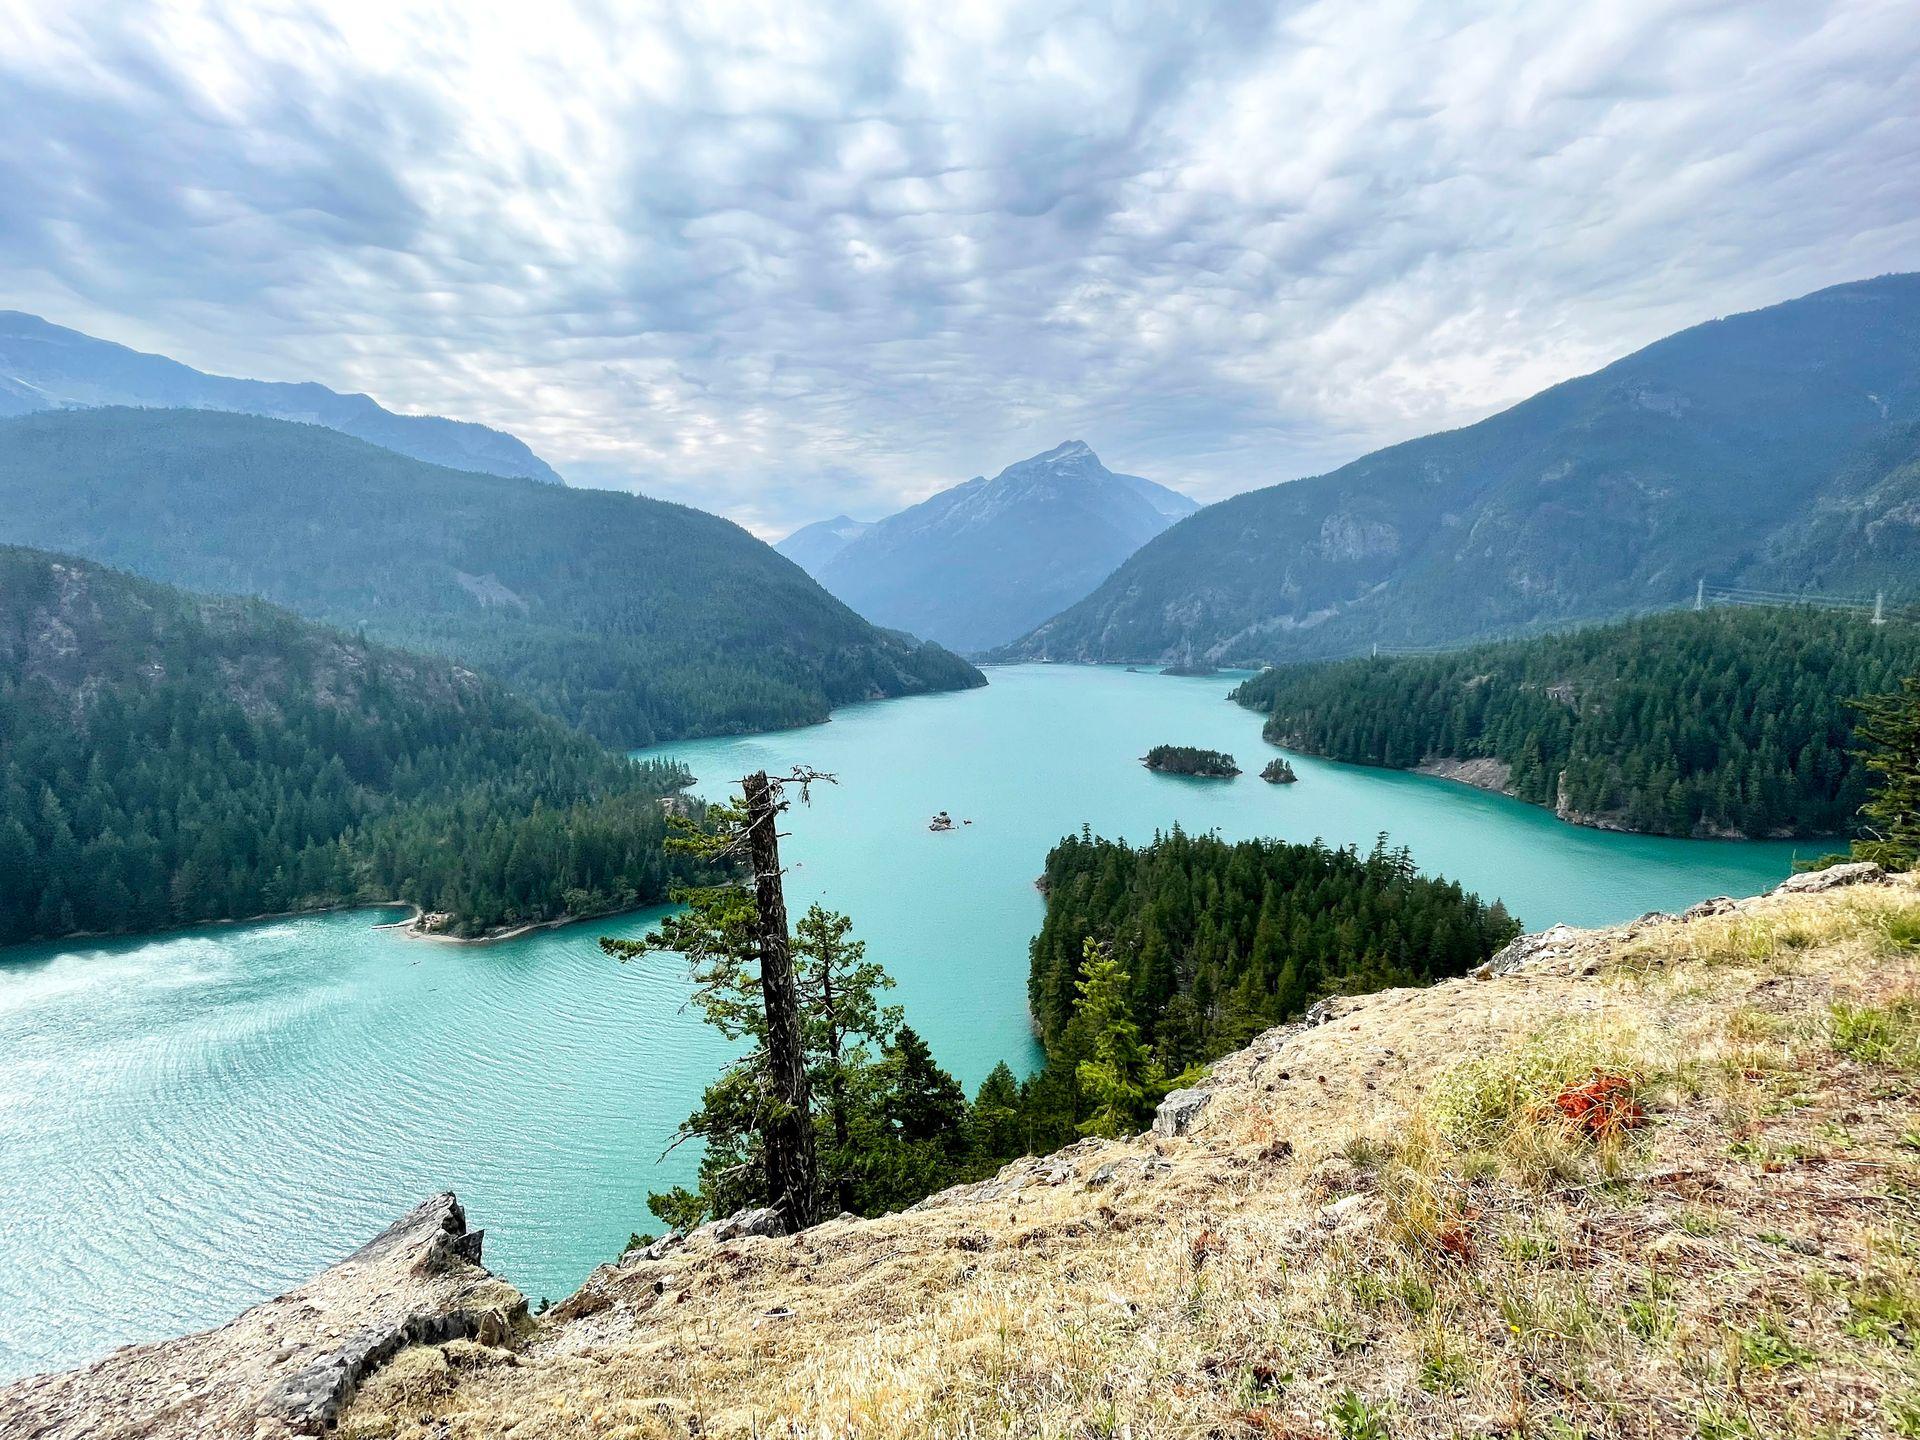 A view the turquoise Diablo Lake from the Diablo Lake Overlook.